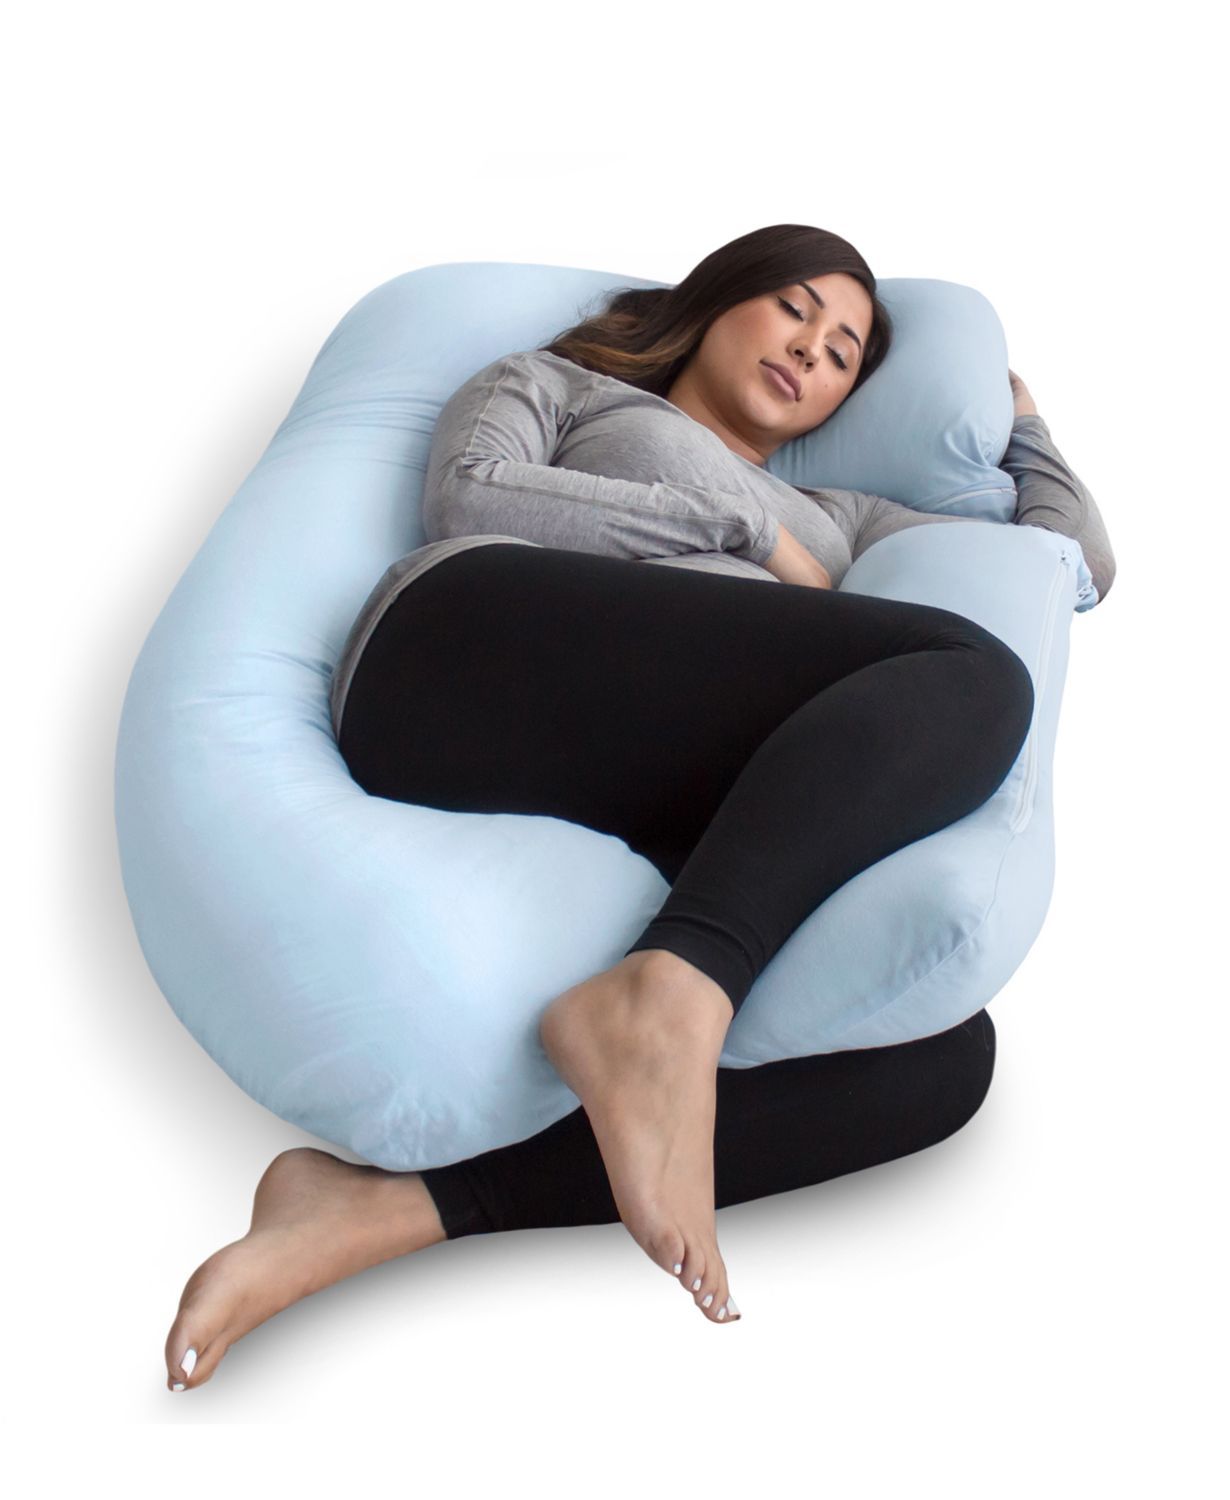 Pregnancy Pillow with Jersey Cover, U Shaped Full Body Pillow